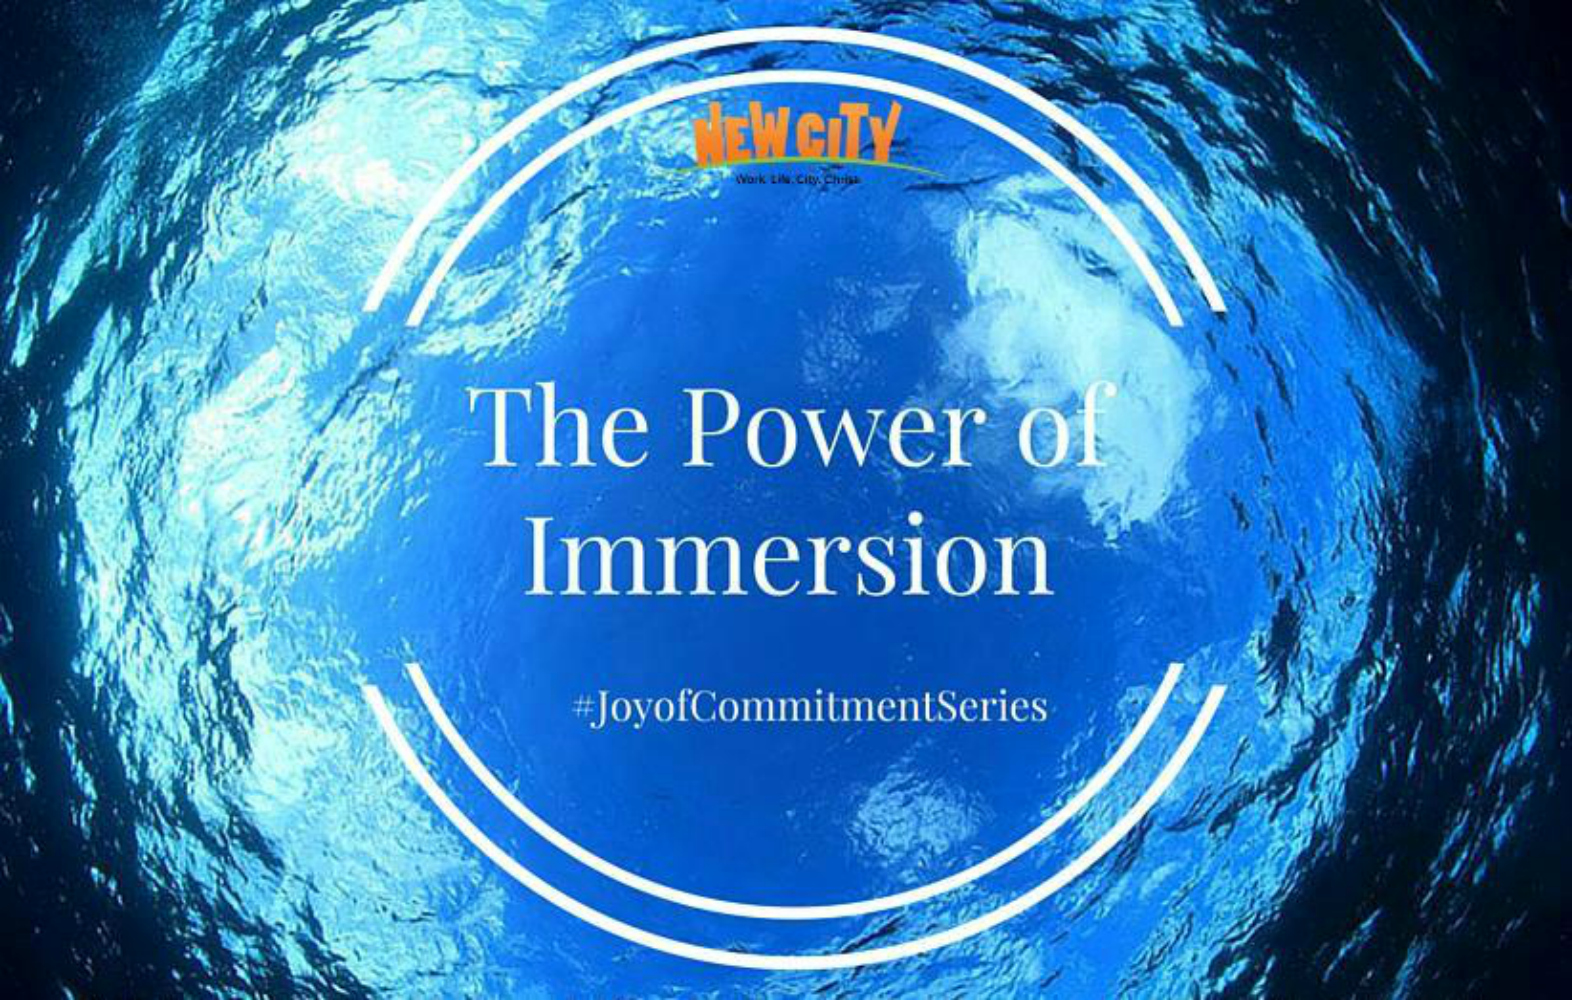 The Power of Immersion Image